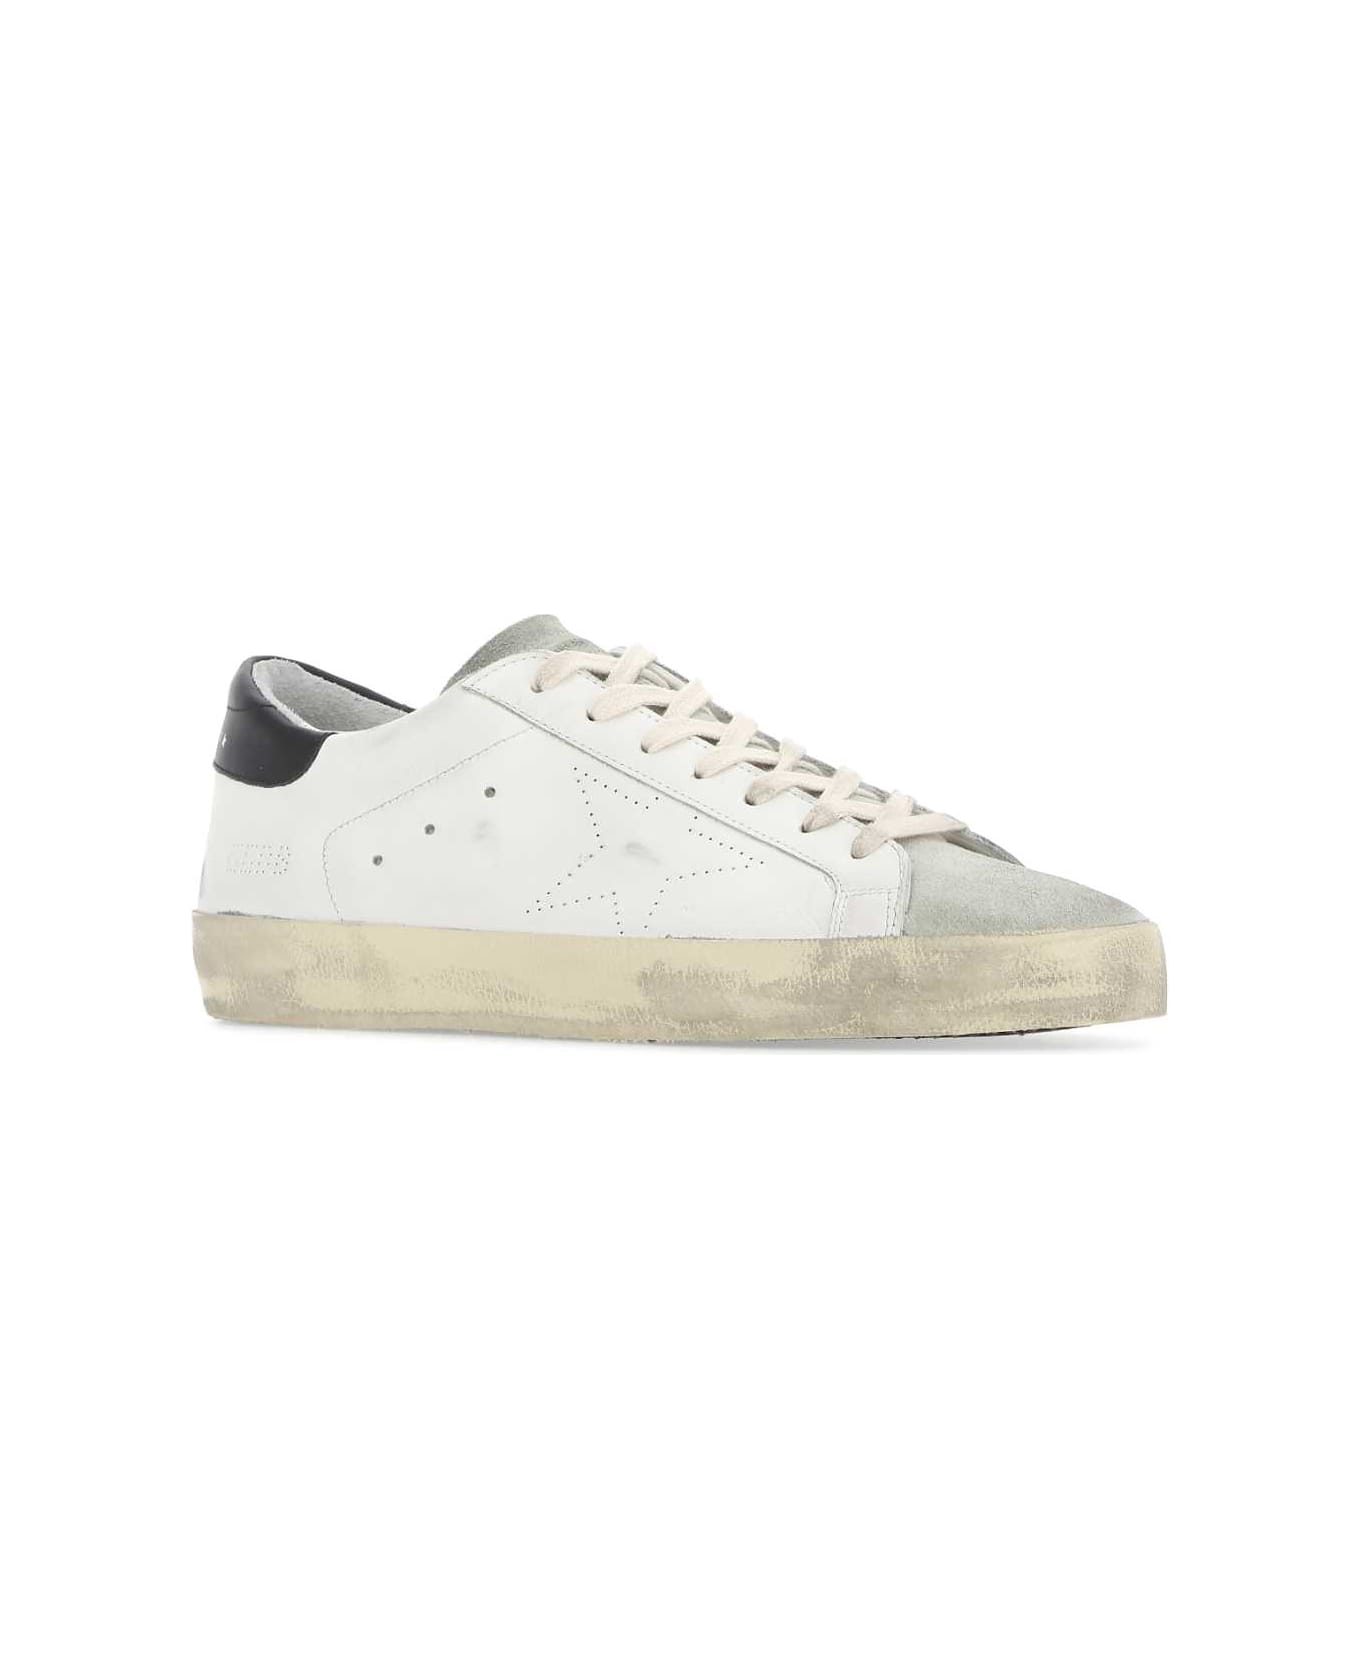 Golden Goose Two-tone Leather Superstar Skate Sneakers - 10220